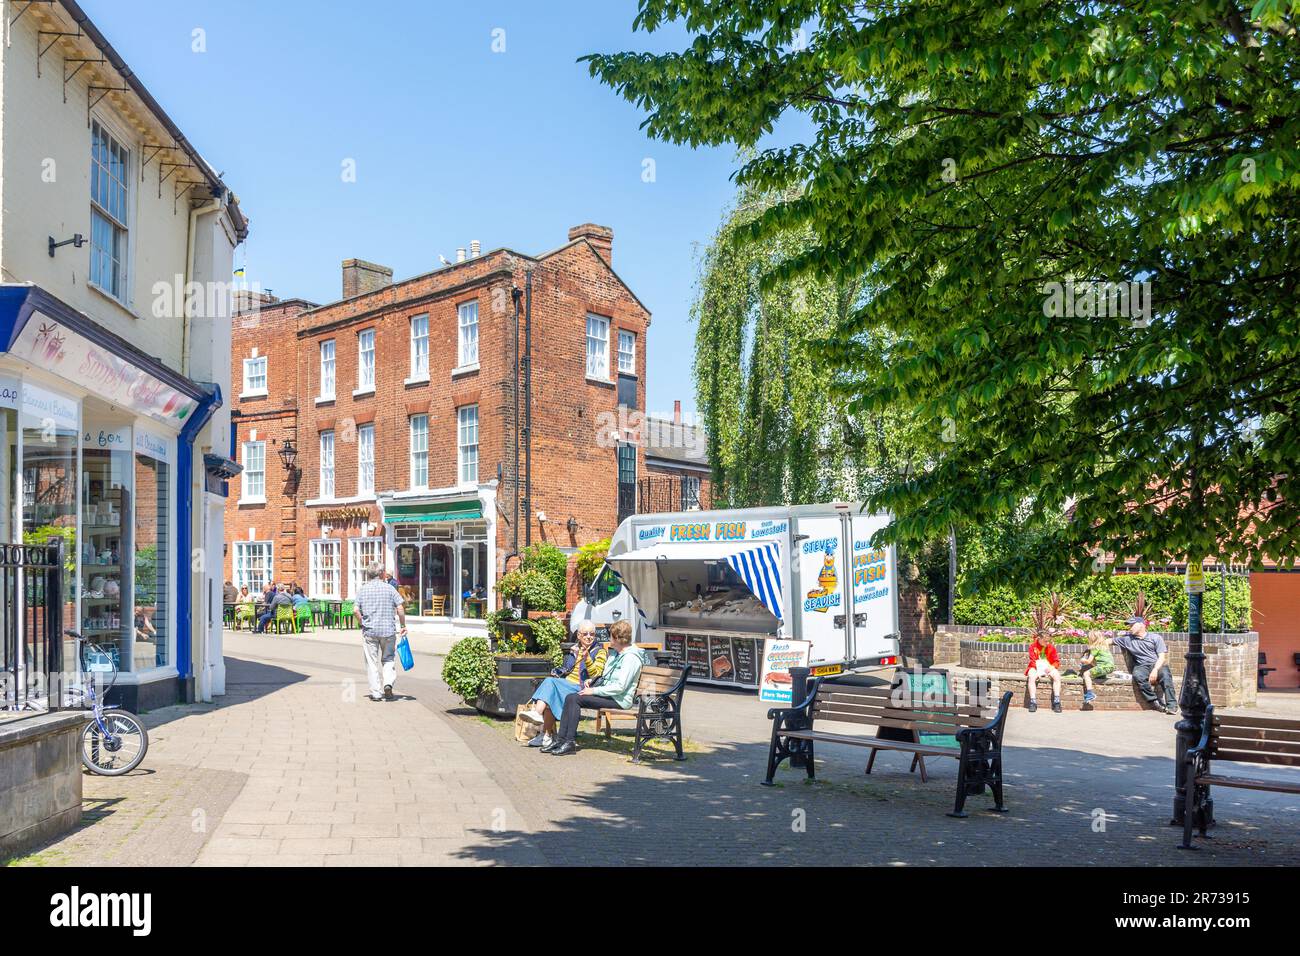 Exchange Square, Beccles, Suffolk, England, United Kingdom Stock Photo